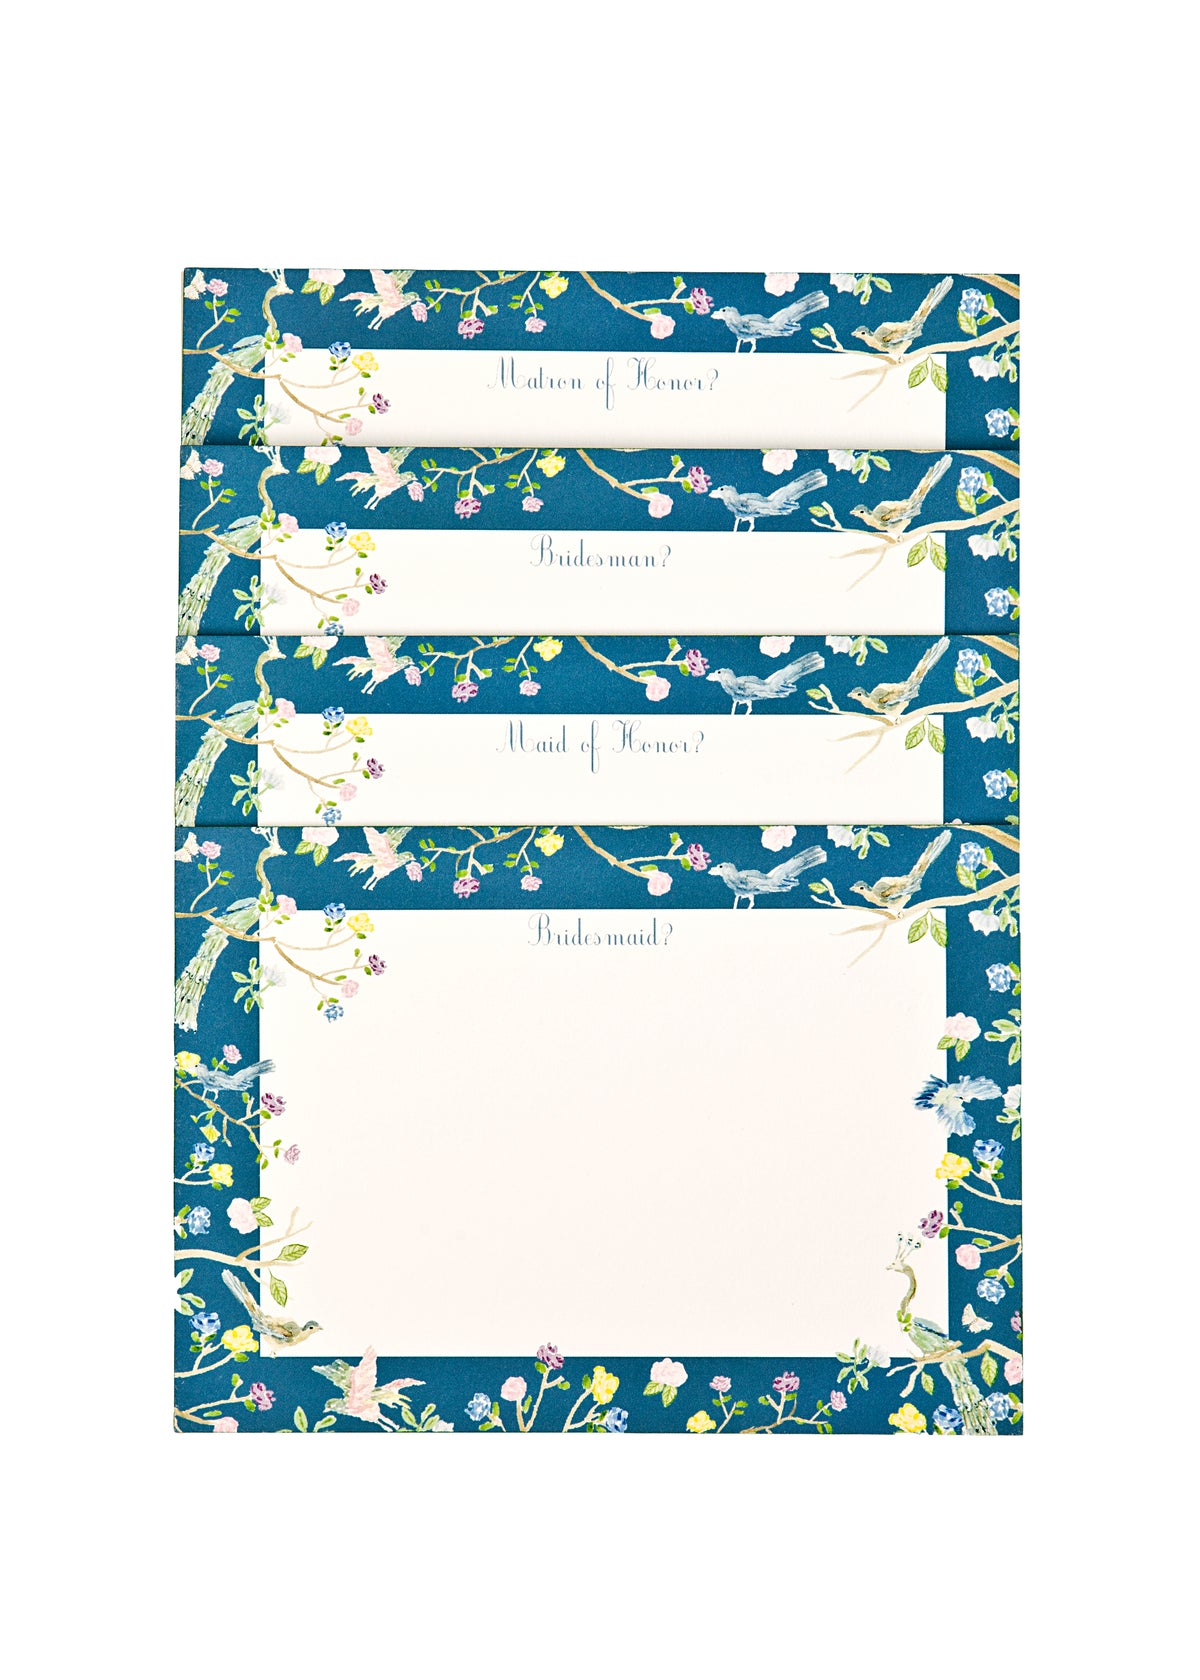 Bridesmaid Cards in Blue Floral, Set of 10